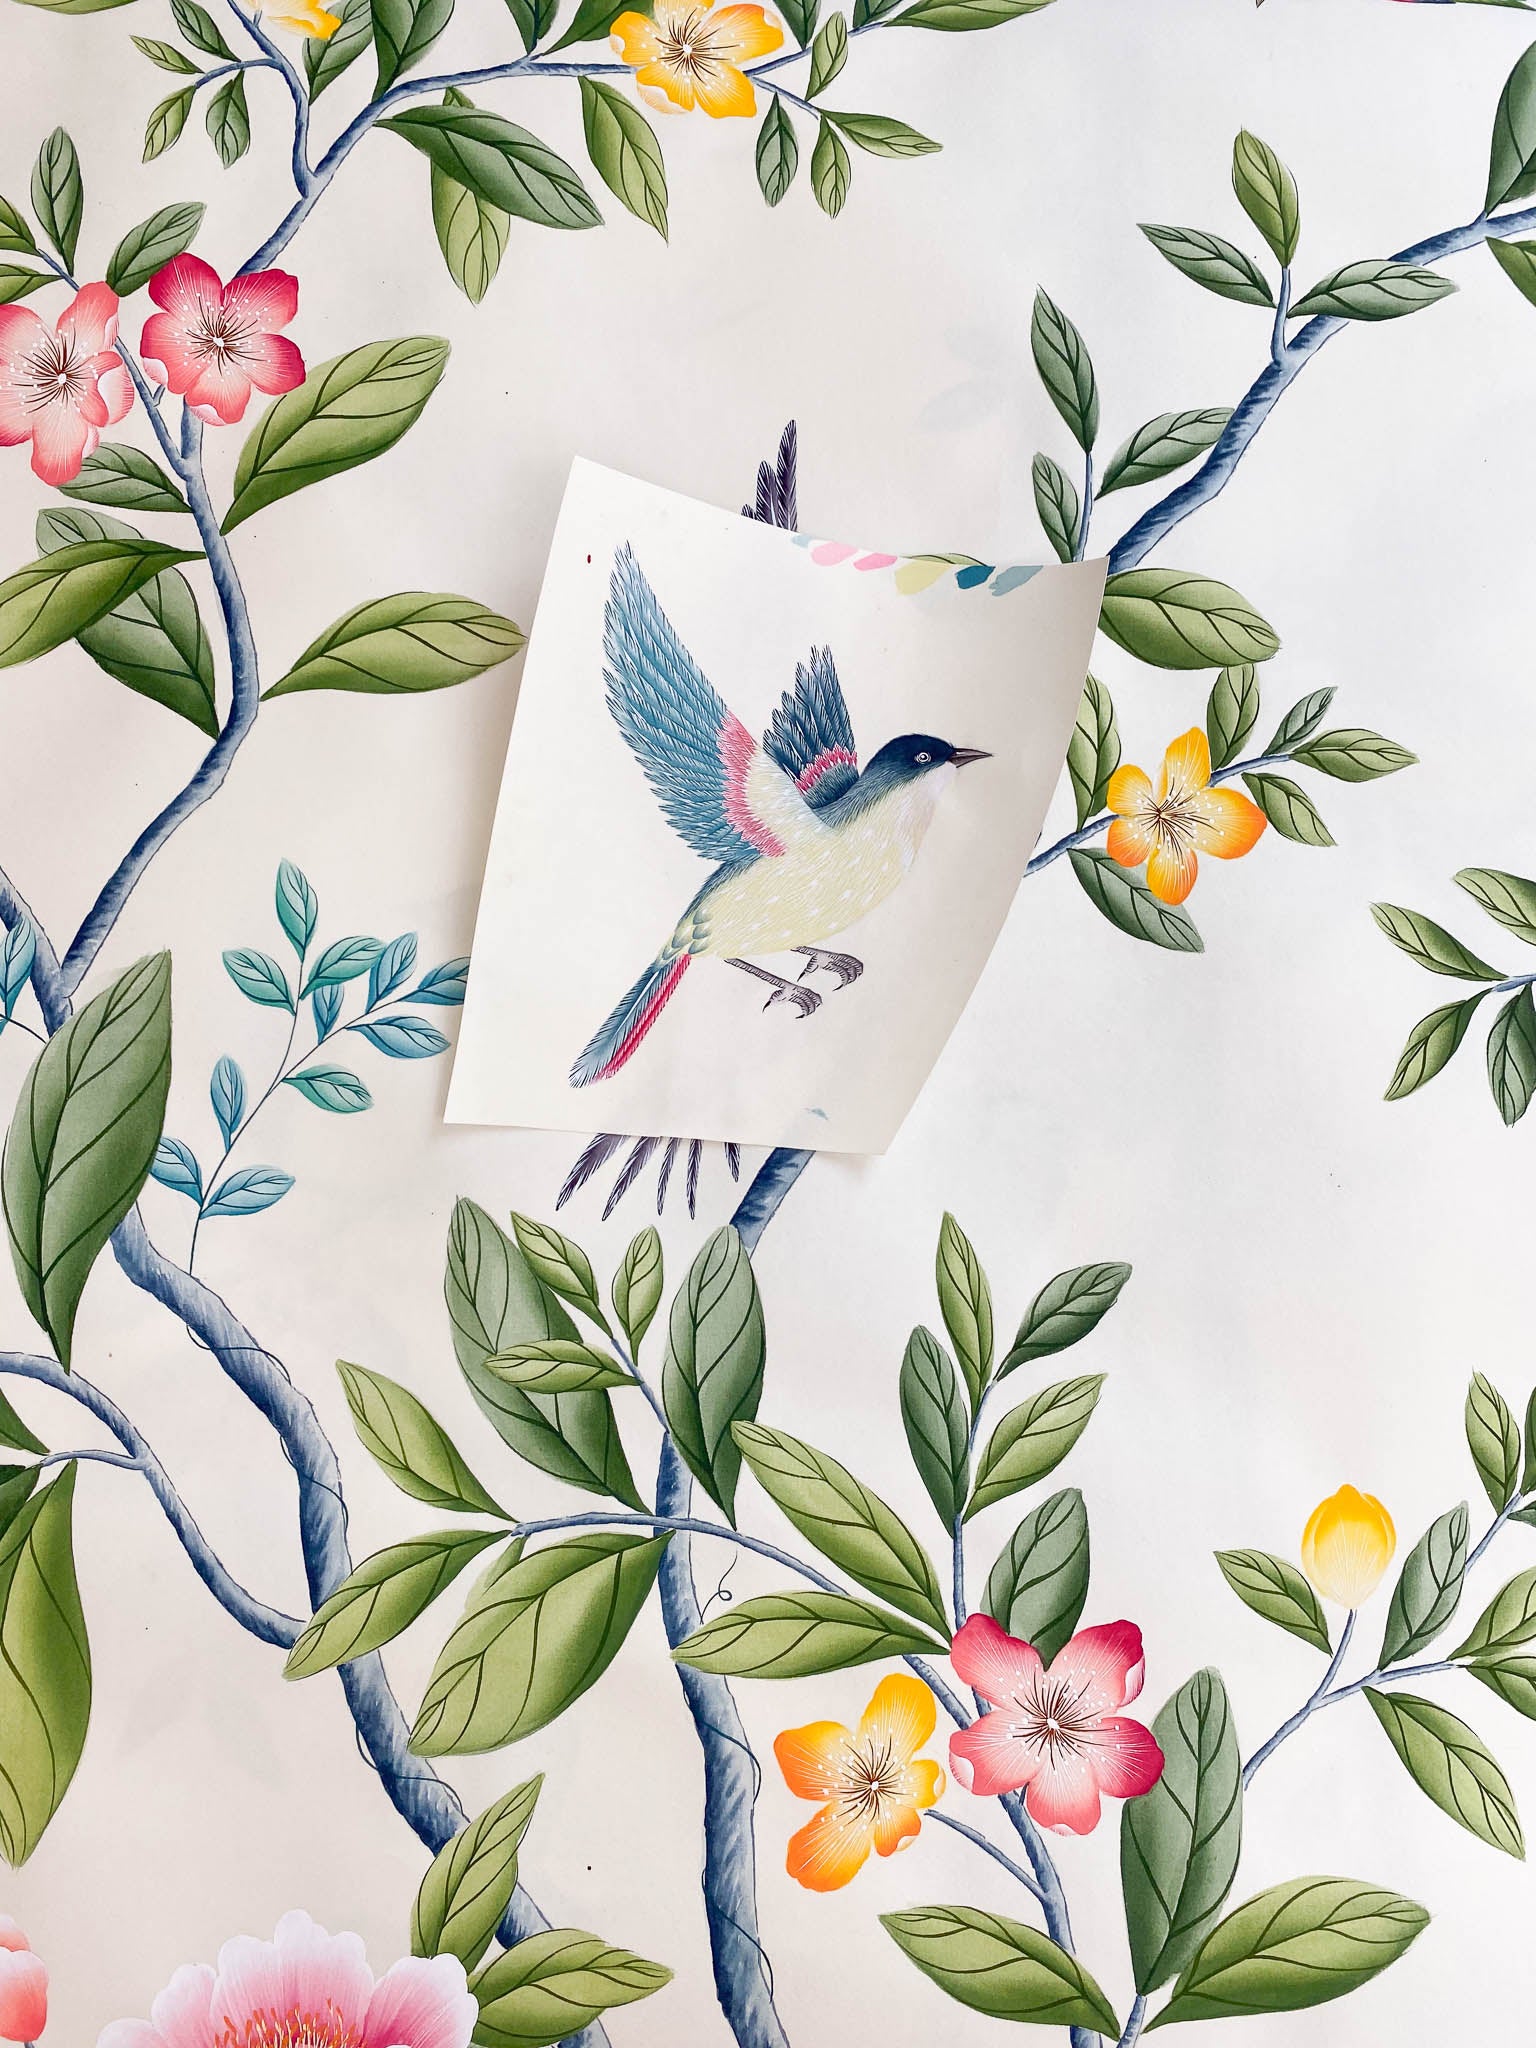 cut out Chinese illustration style bird pinned to floral chinoiserie painting